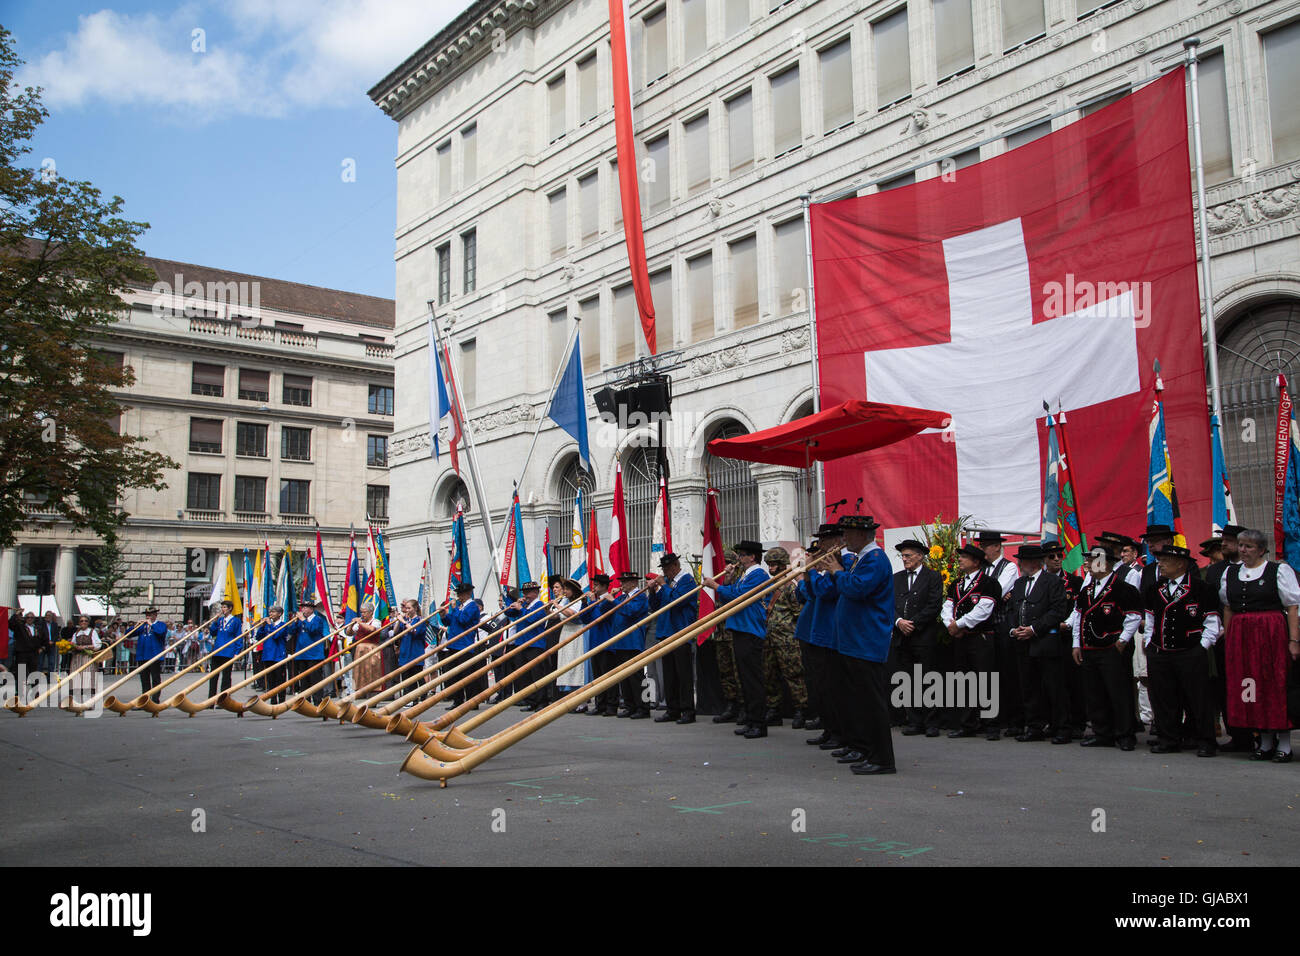 Alphornblasers play alpine horns at a ceremony in Zurich in celebration of Swiss National Day. Stock Photo